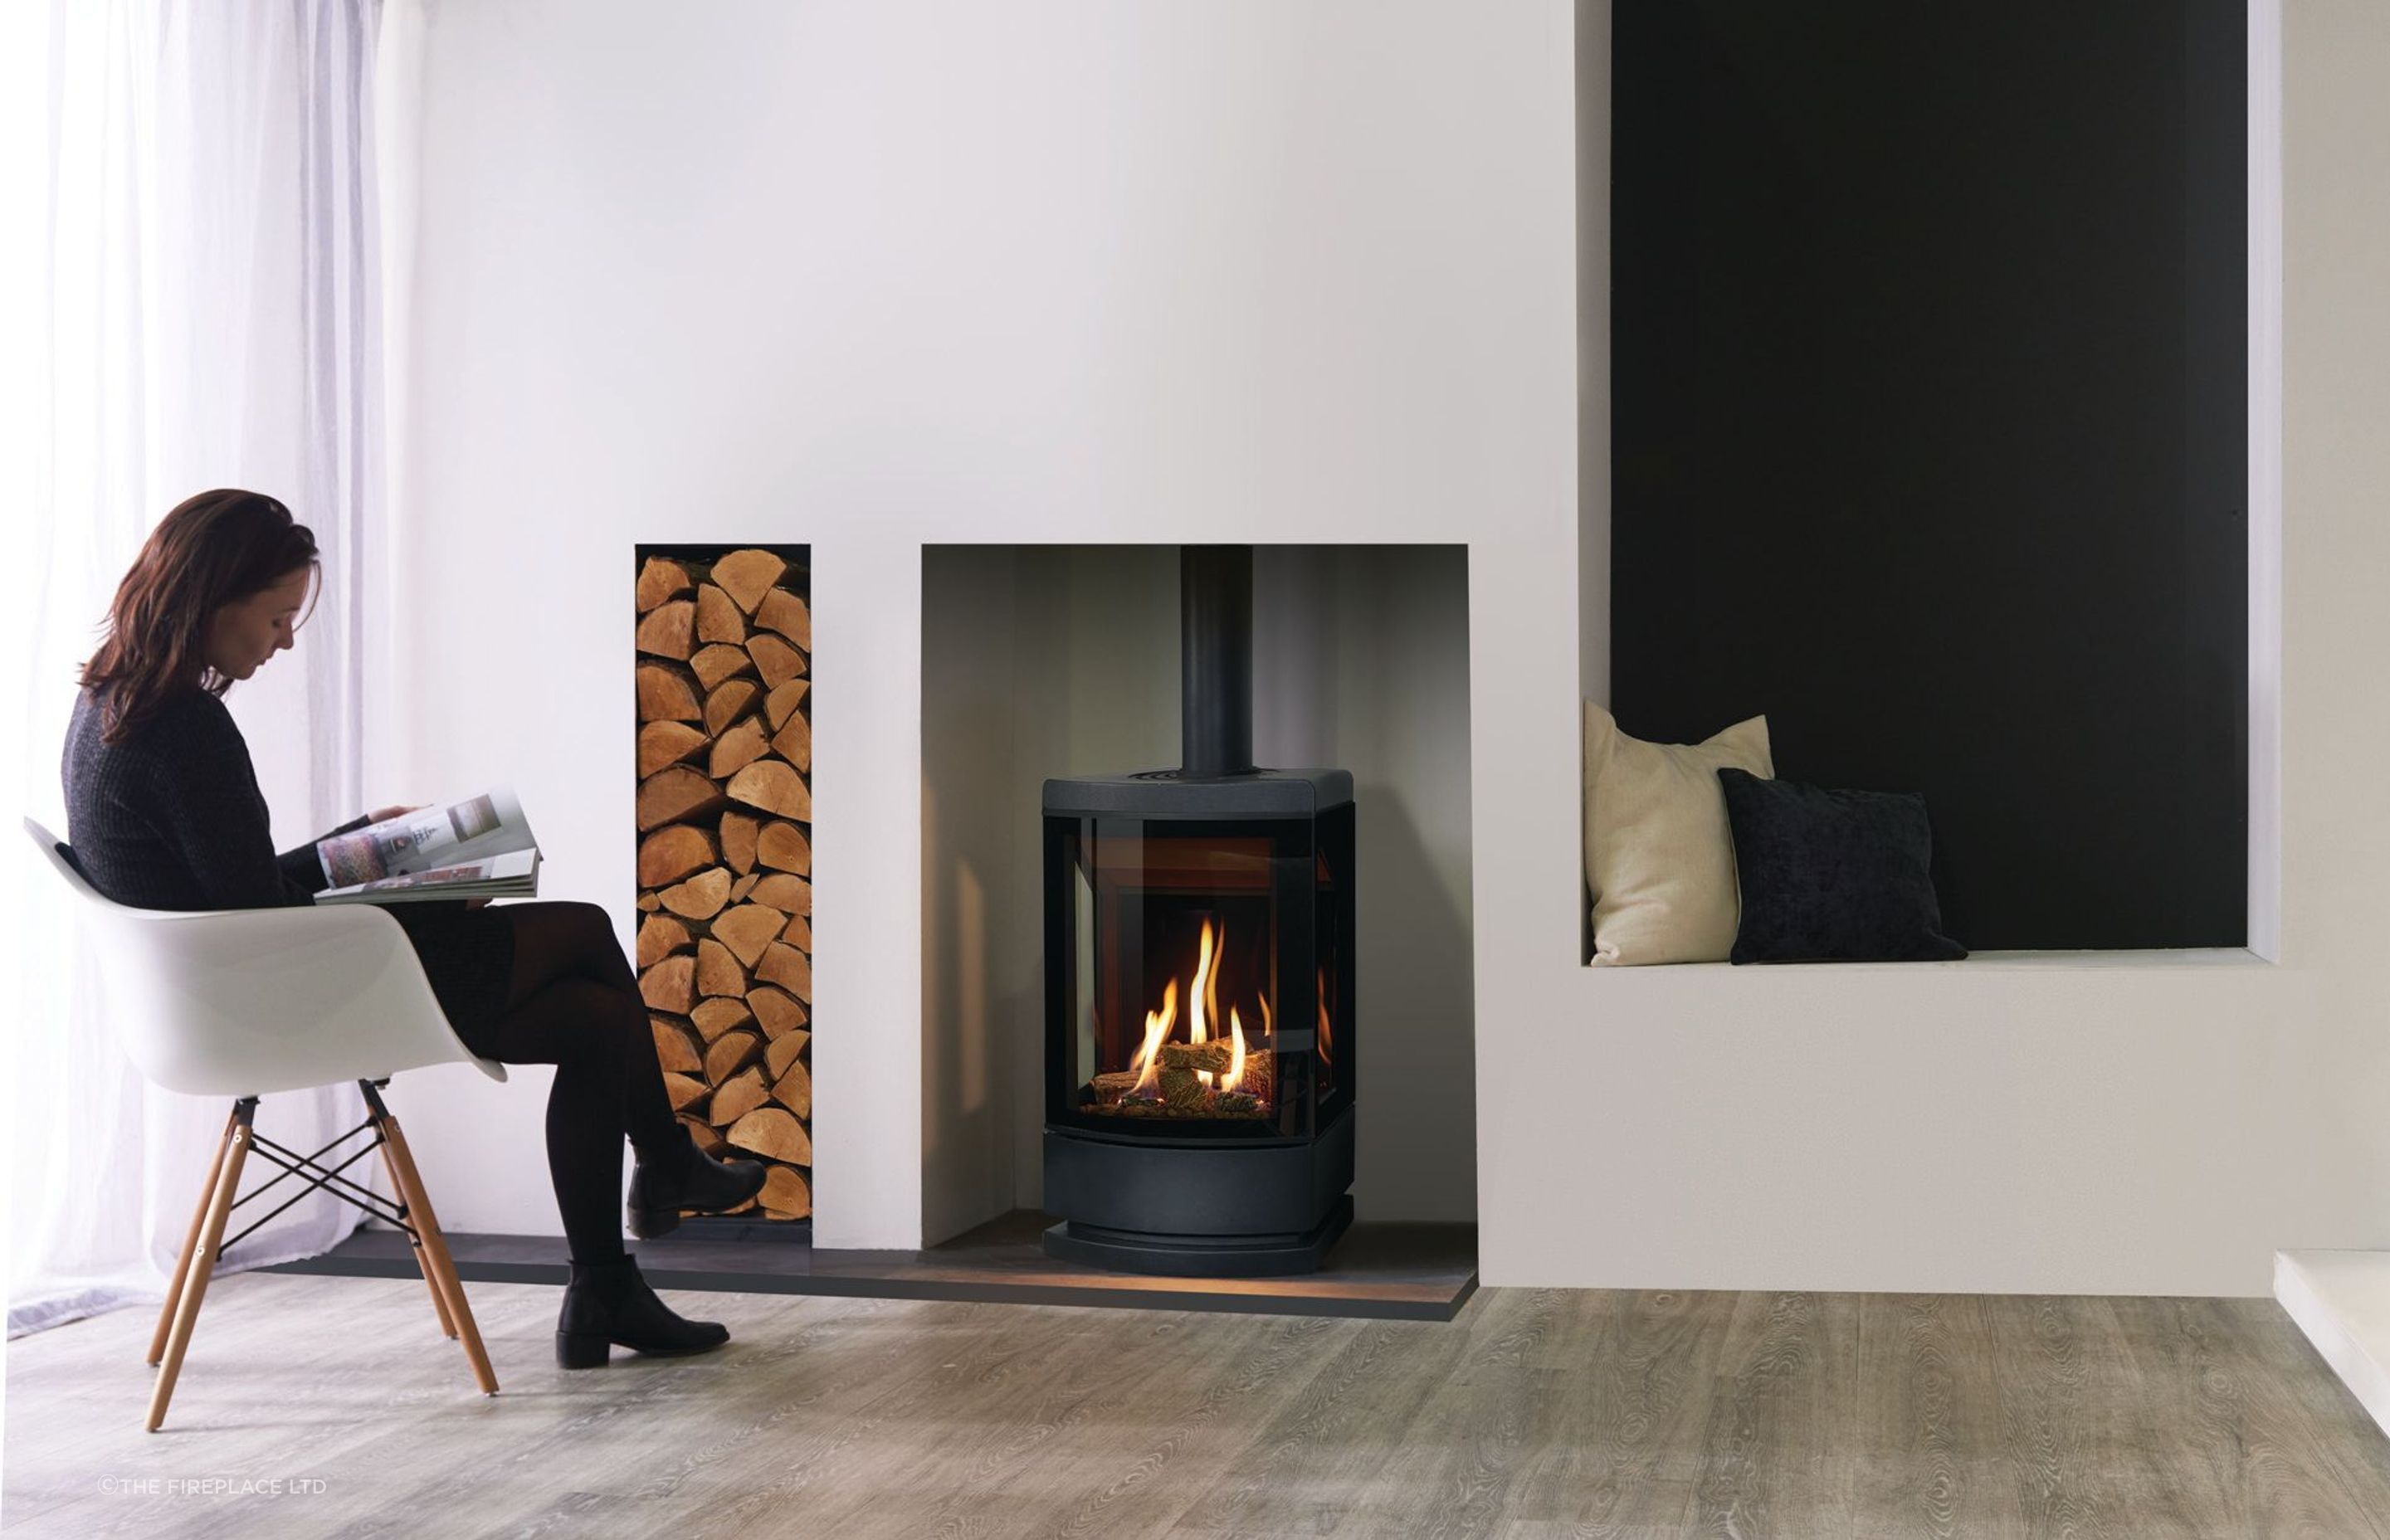 Fan-free and quiet, the Gazco Loft 3-Sided Freestanding Gas Fireplace is a great lifestyle choice for a fireplace